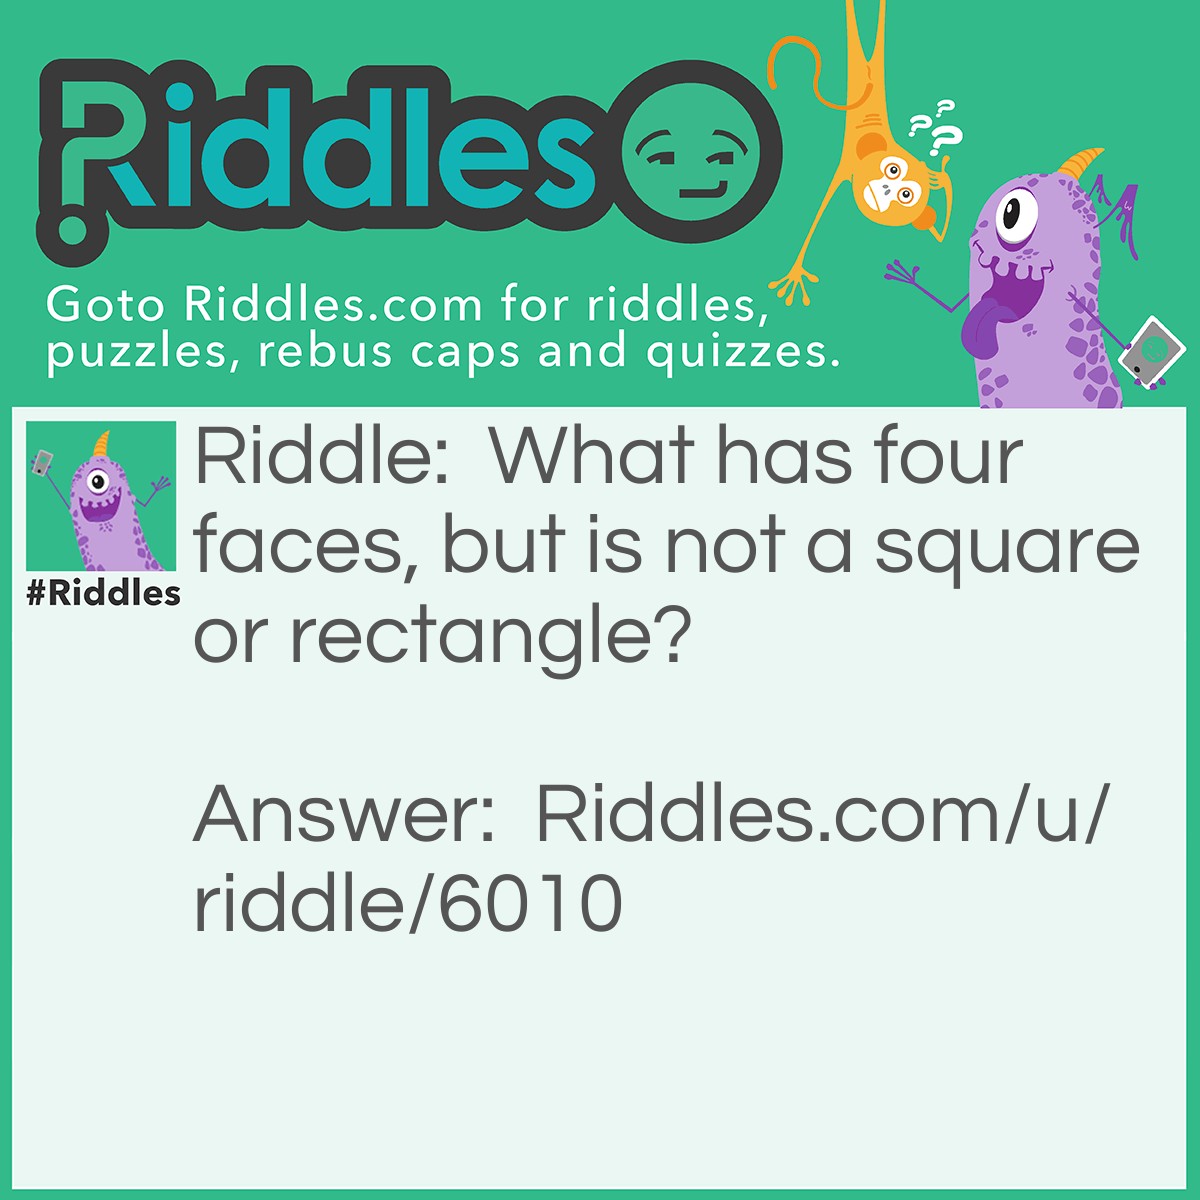 Riddle: What has four faces, but is not a square or rectangle? Answer: Mt. Rushmore.